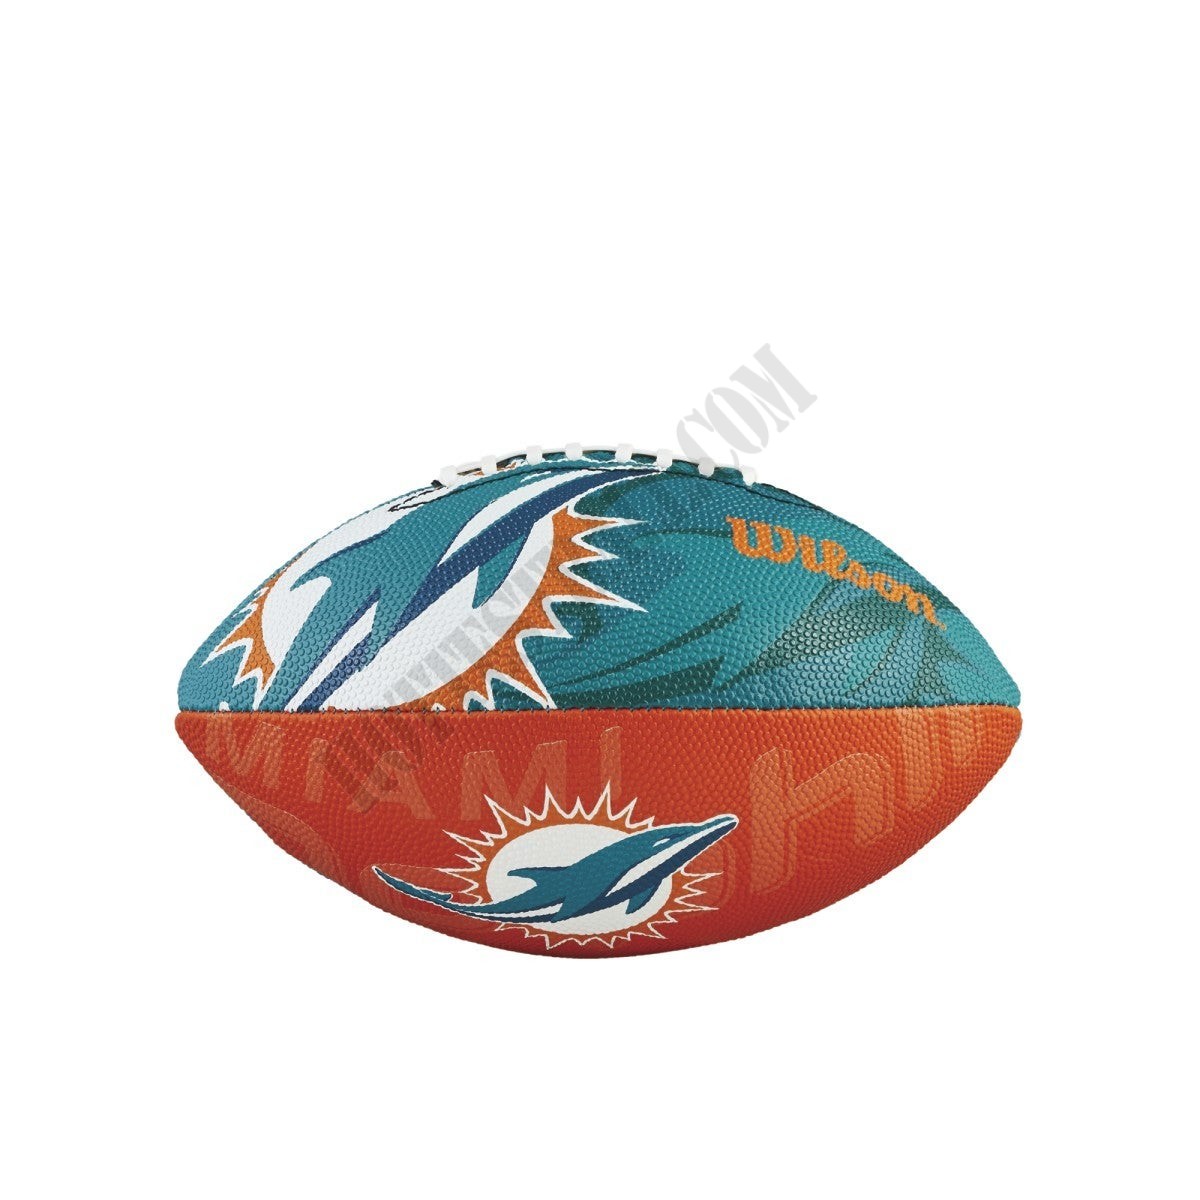 NFL Team Tailgate Football - Miami Dolphins ● Wilson Promotions - -0